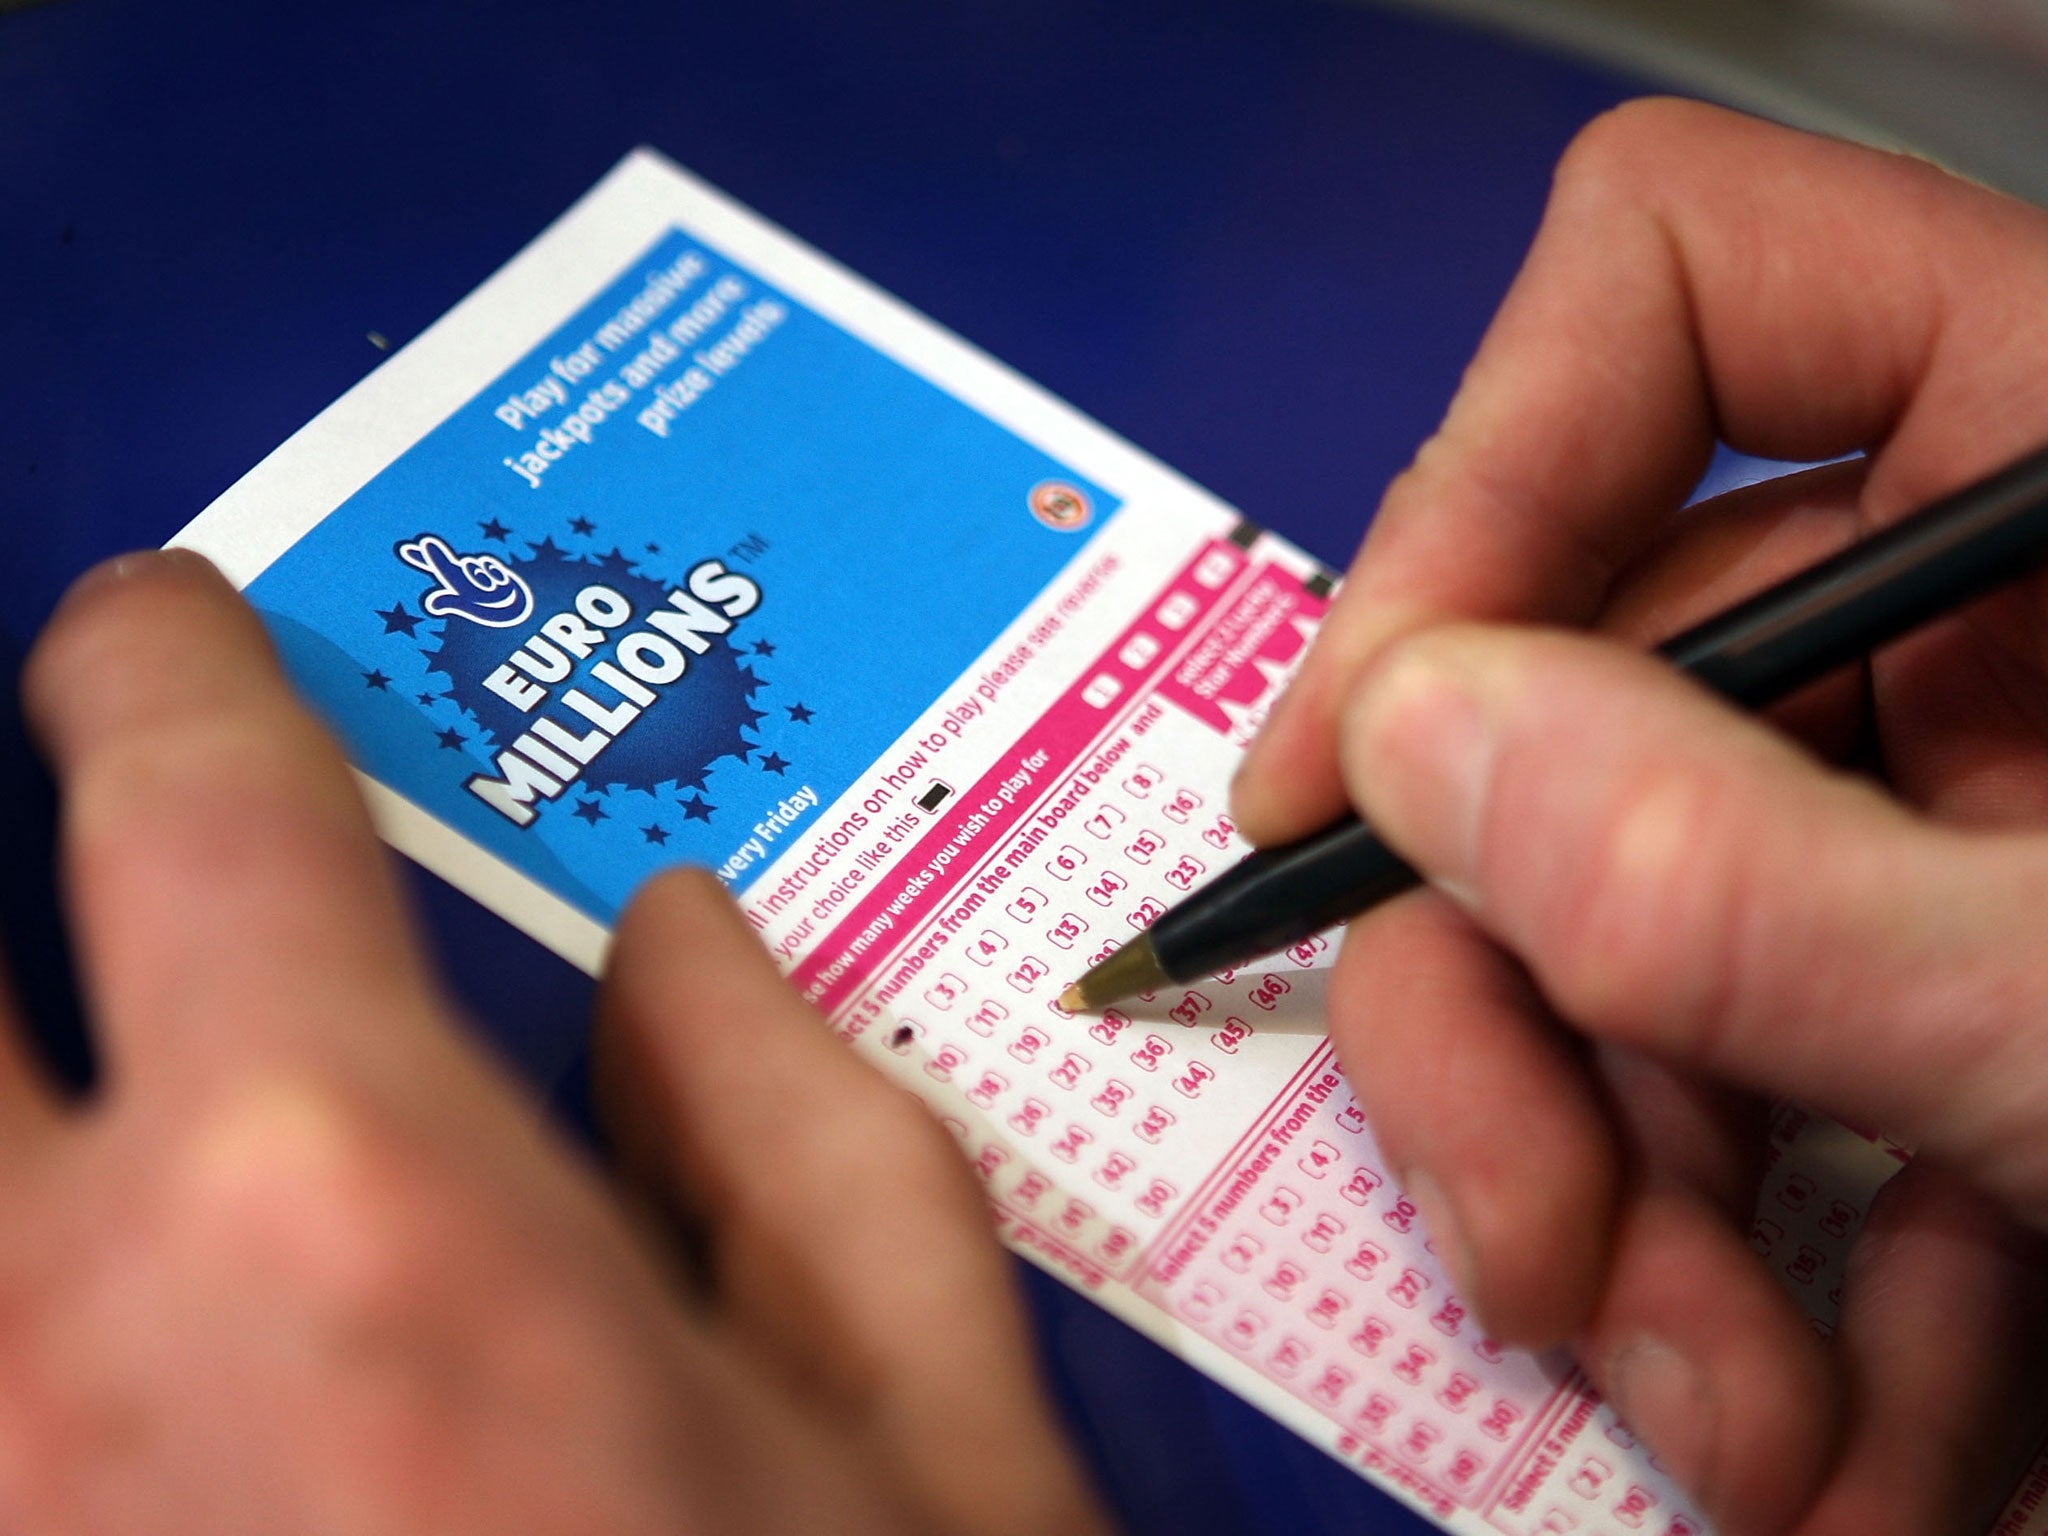 A poll among lottery winners revealed that people do become more Tory the richer they become